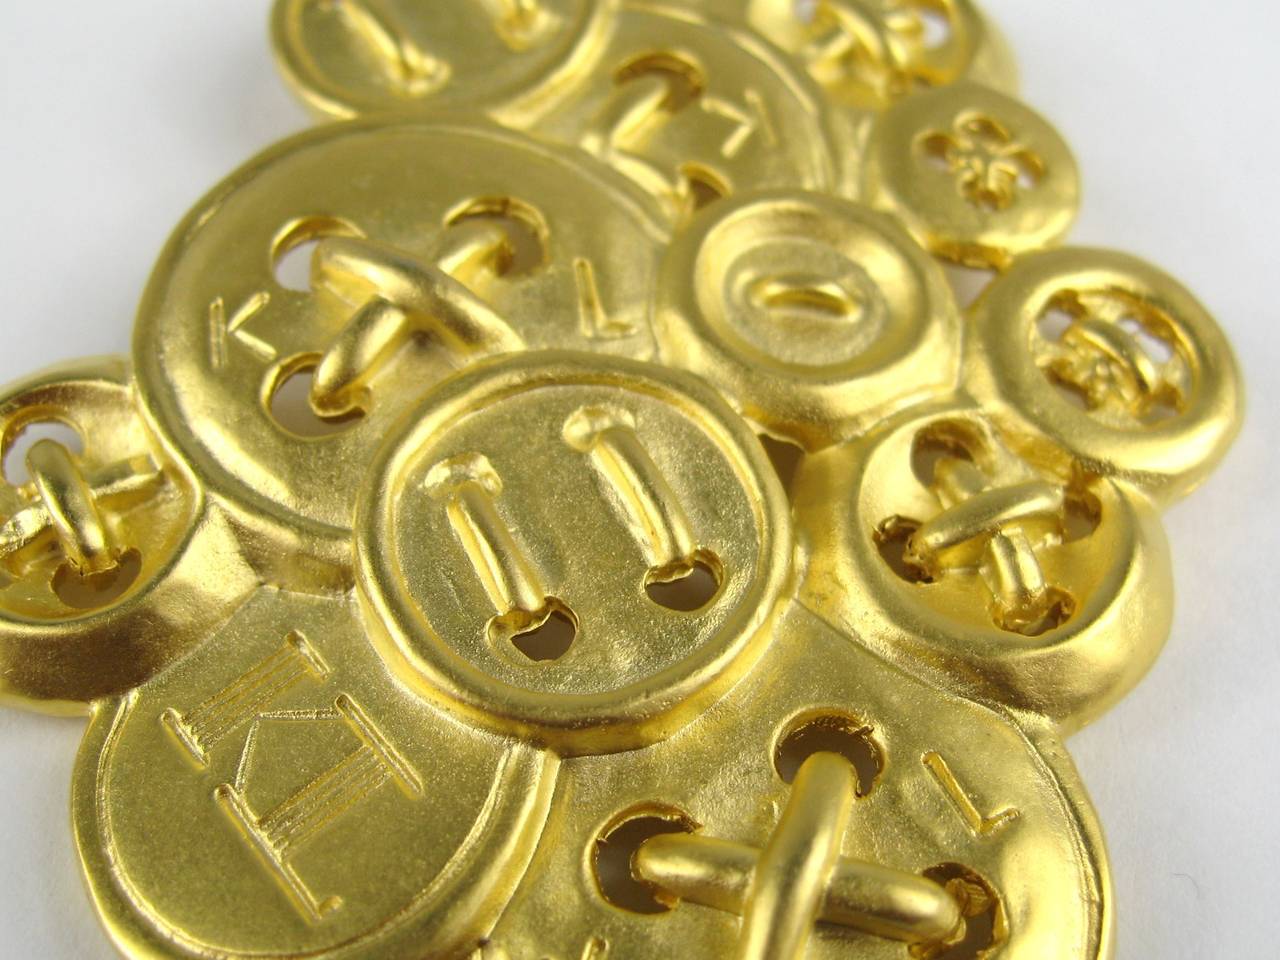  Karl Lagerfeld Necklace Button Charm Gold Gilt , Never Worn 1980s In New Condition For Sale In Wallkill, NY